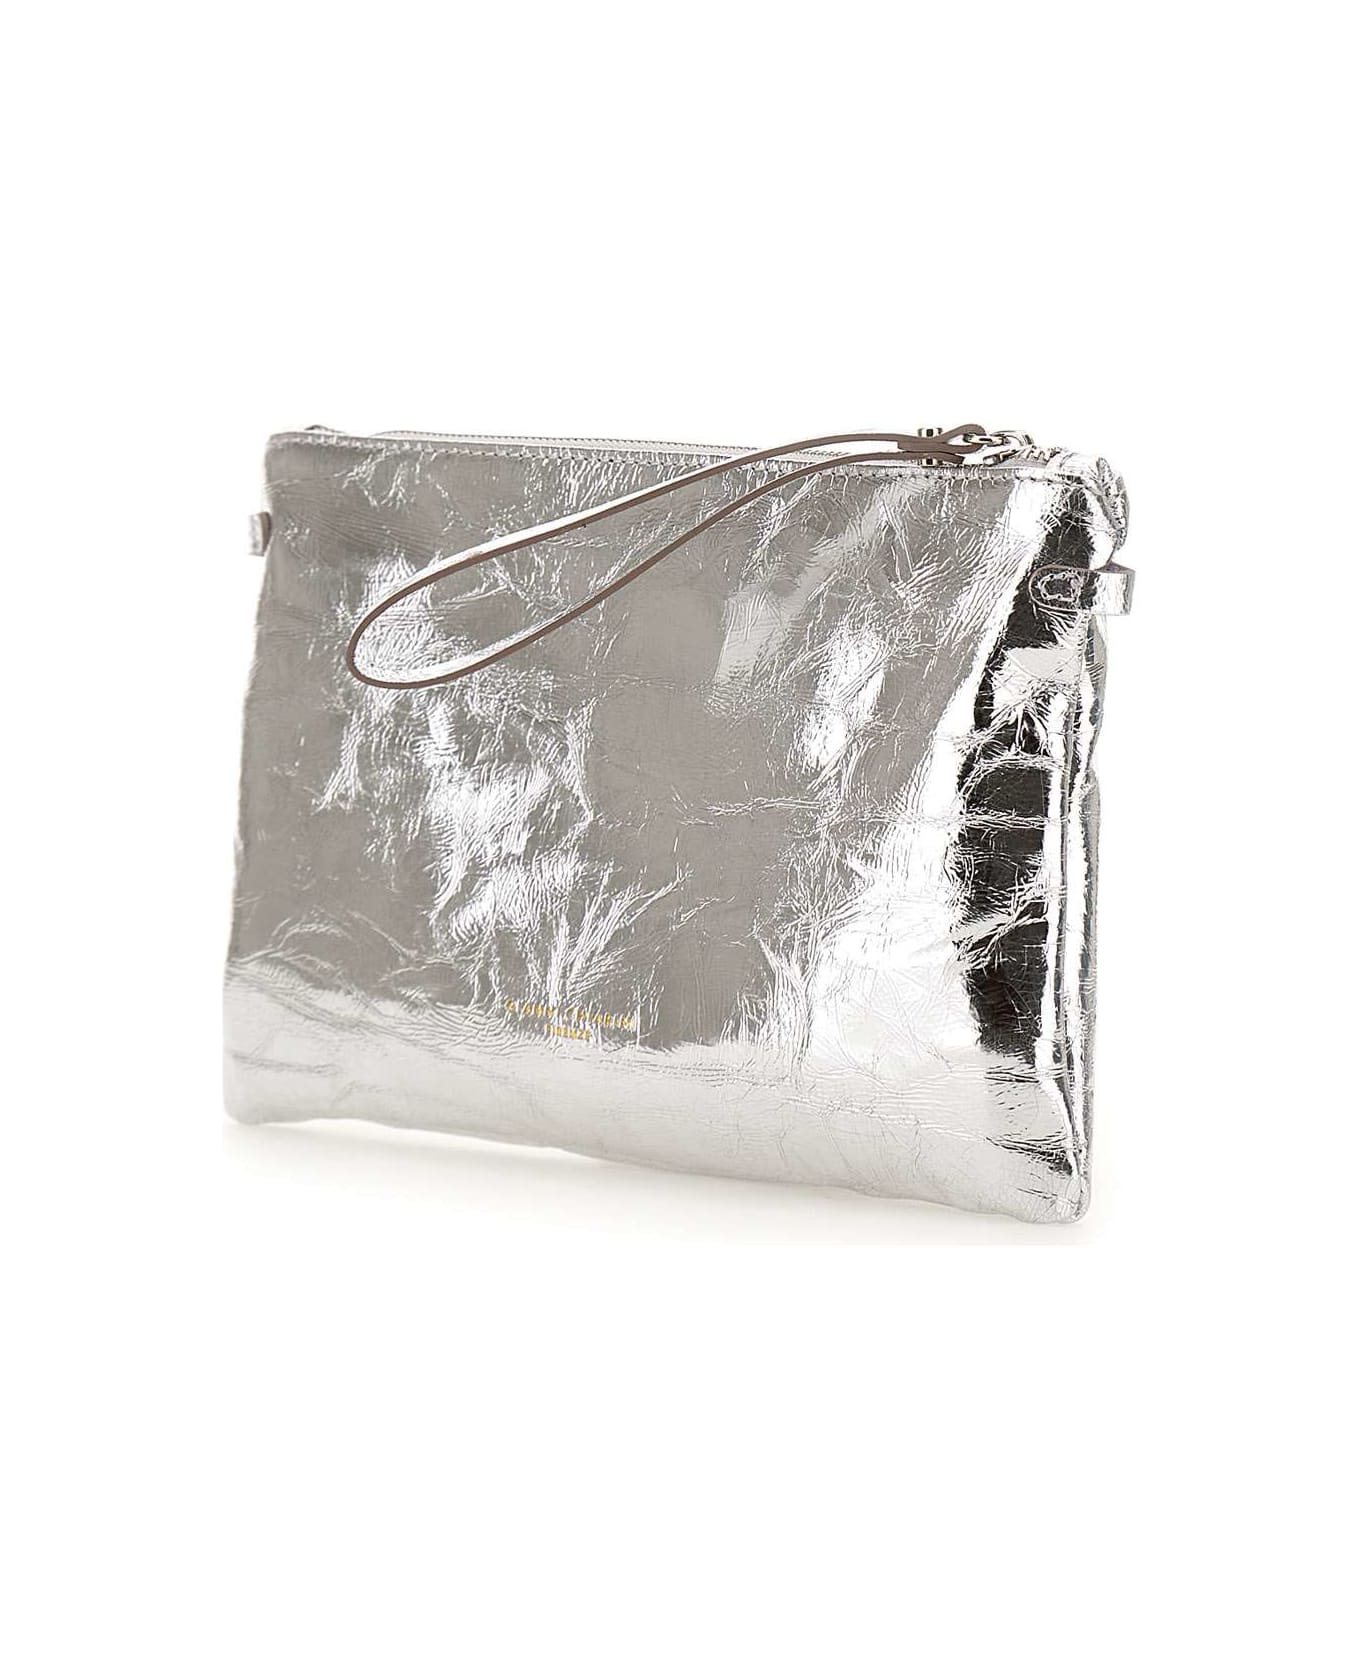 Gianni Chiarini "hermy" Leather Clutch Bag - SILVER クラッチバッグ